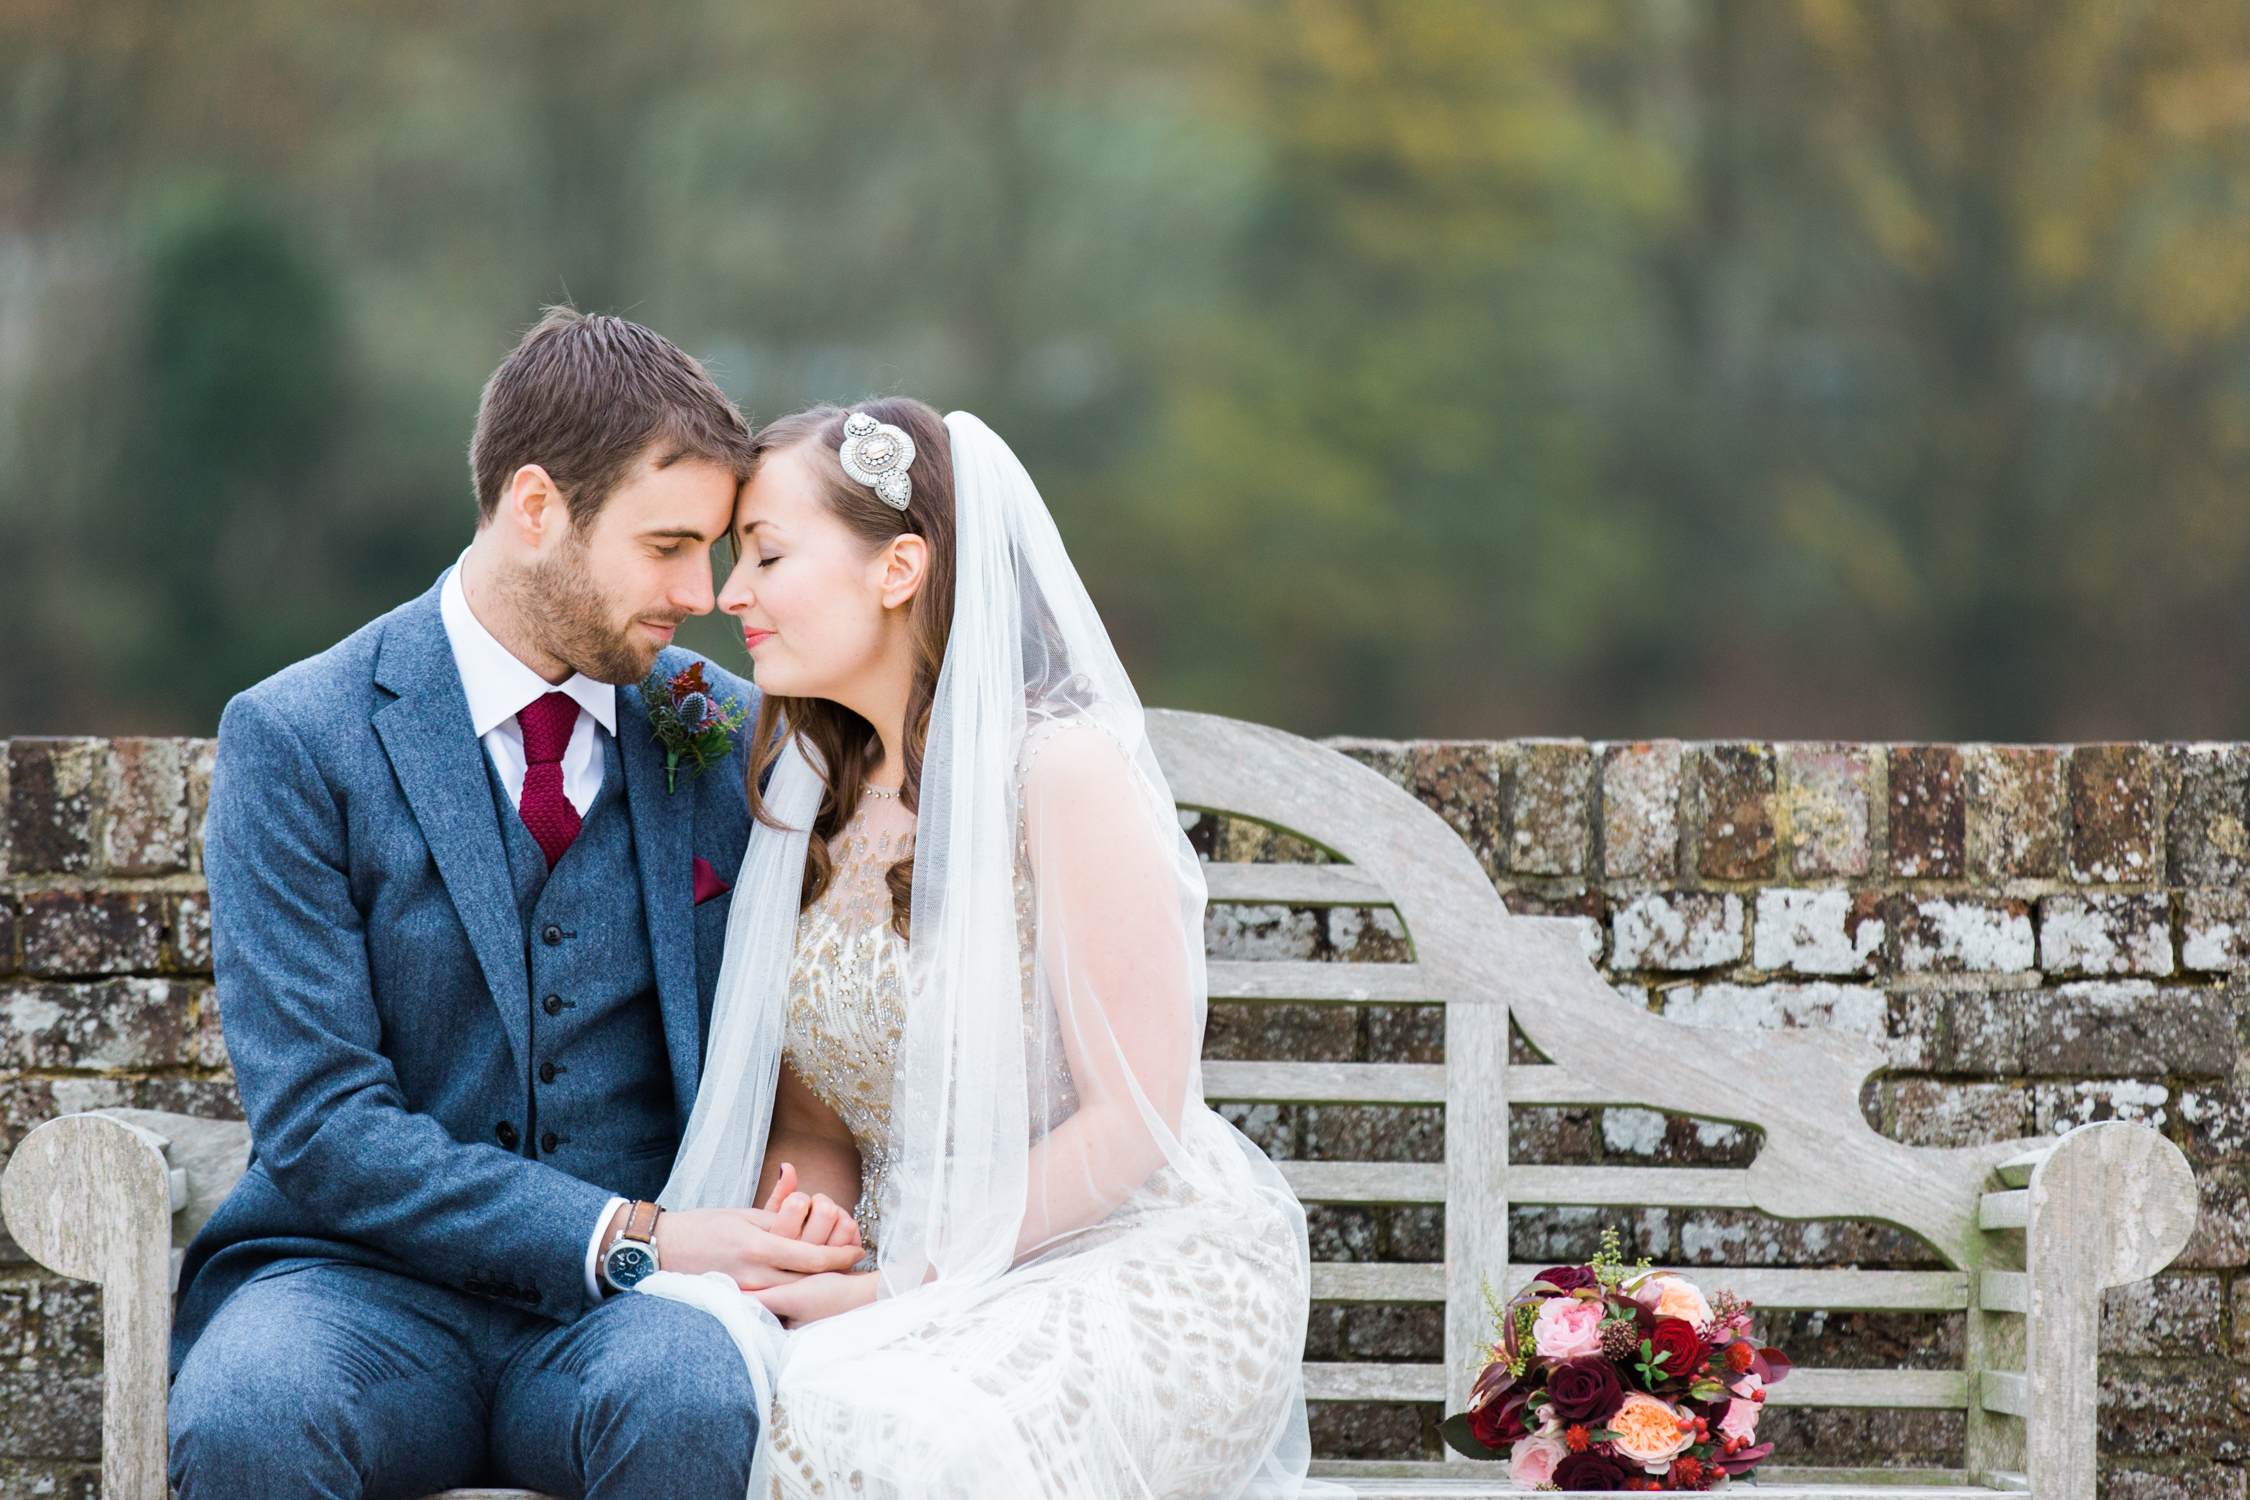 Romantic and natural bridal portraits by UK Fine Art Wedding Photographer.